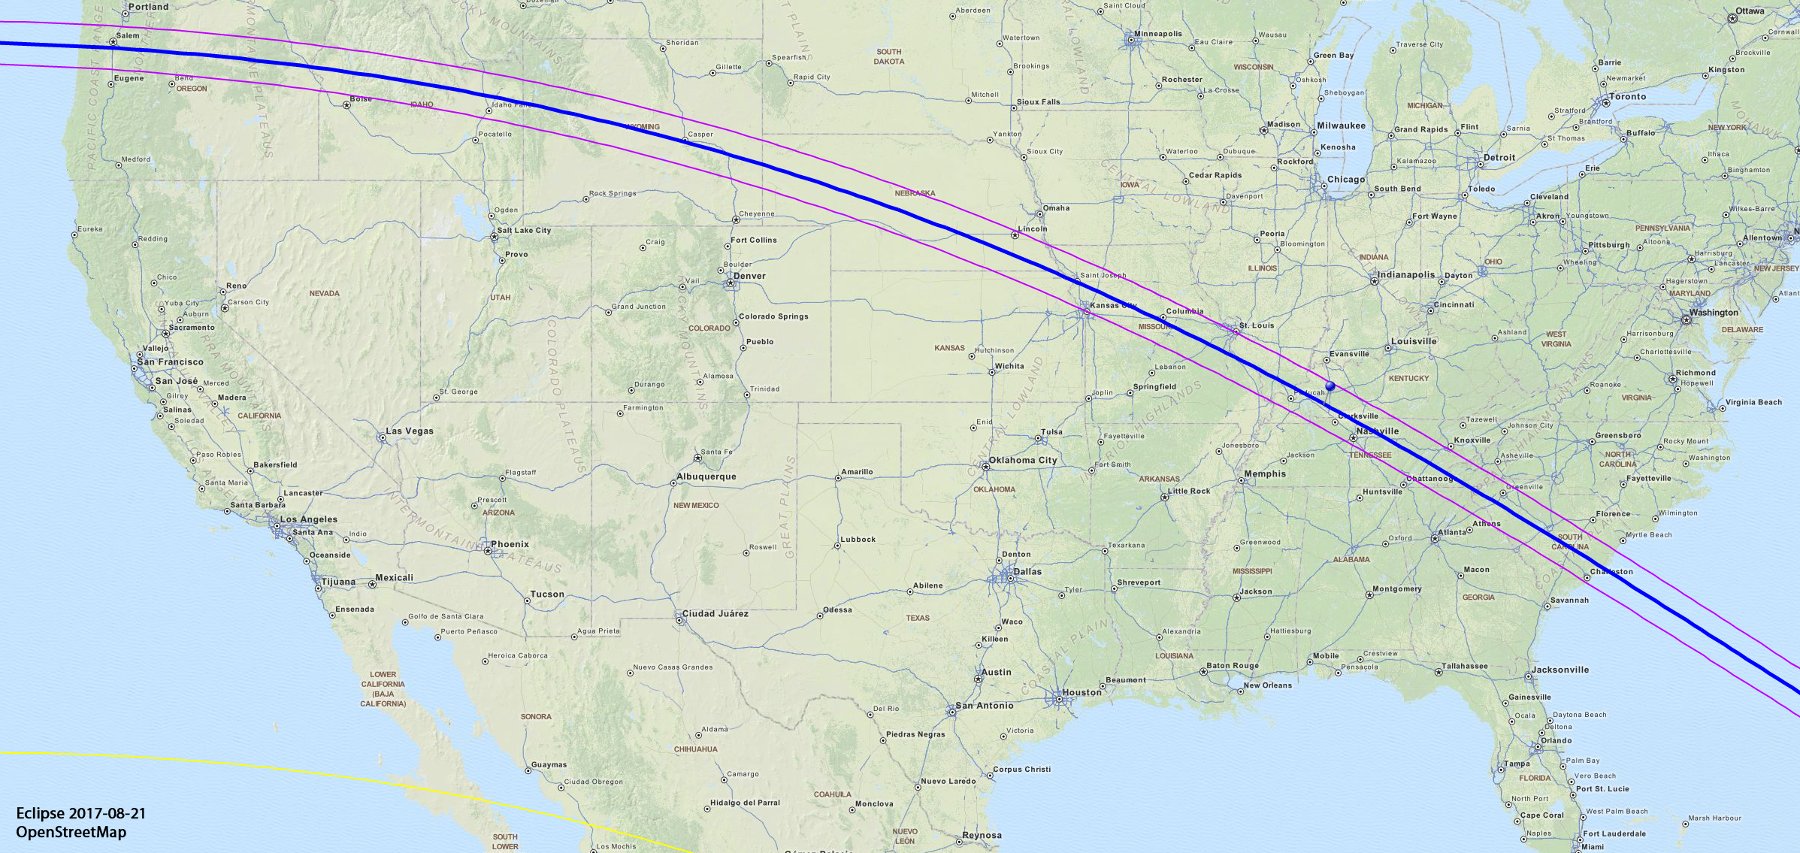 2017 Eclipse Path of Totality